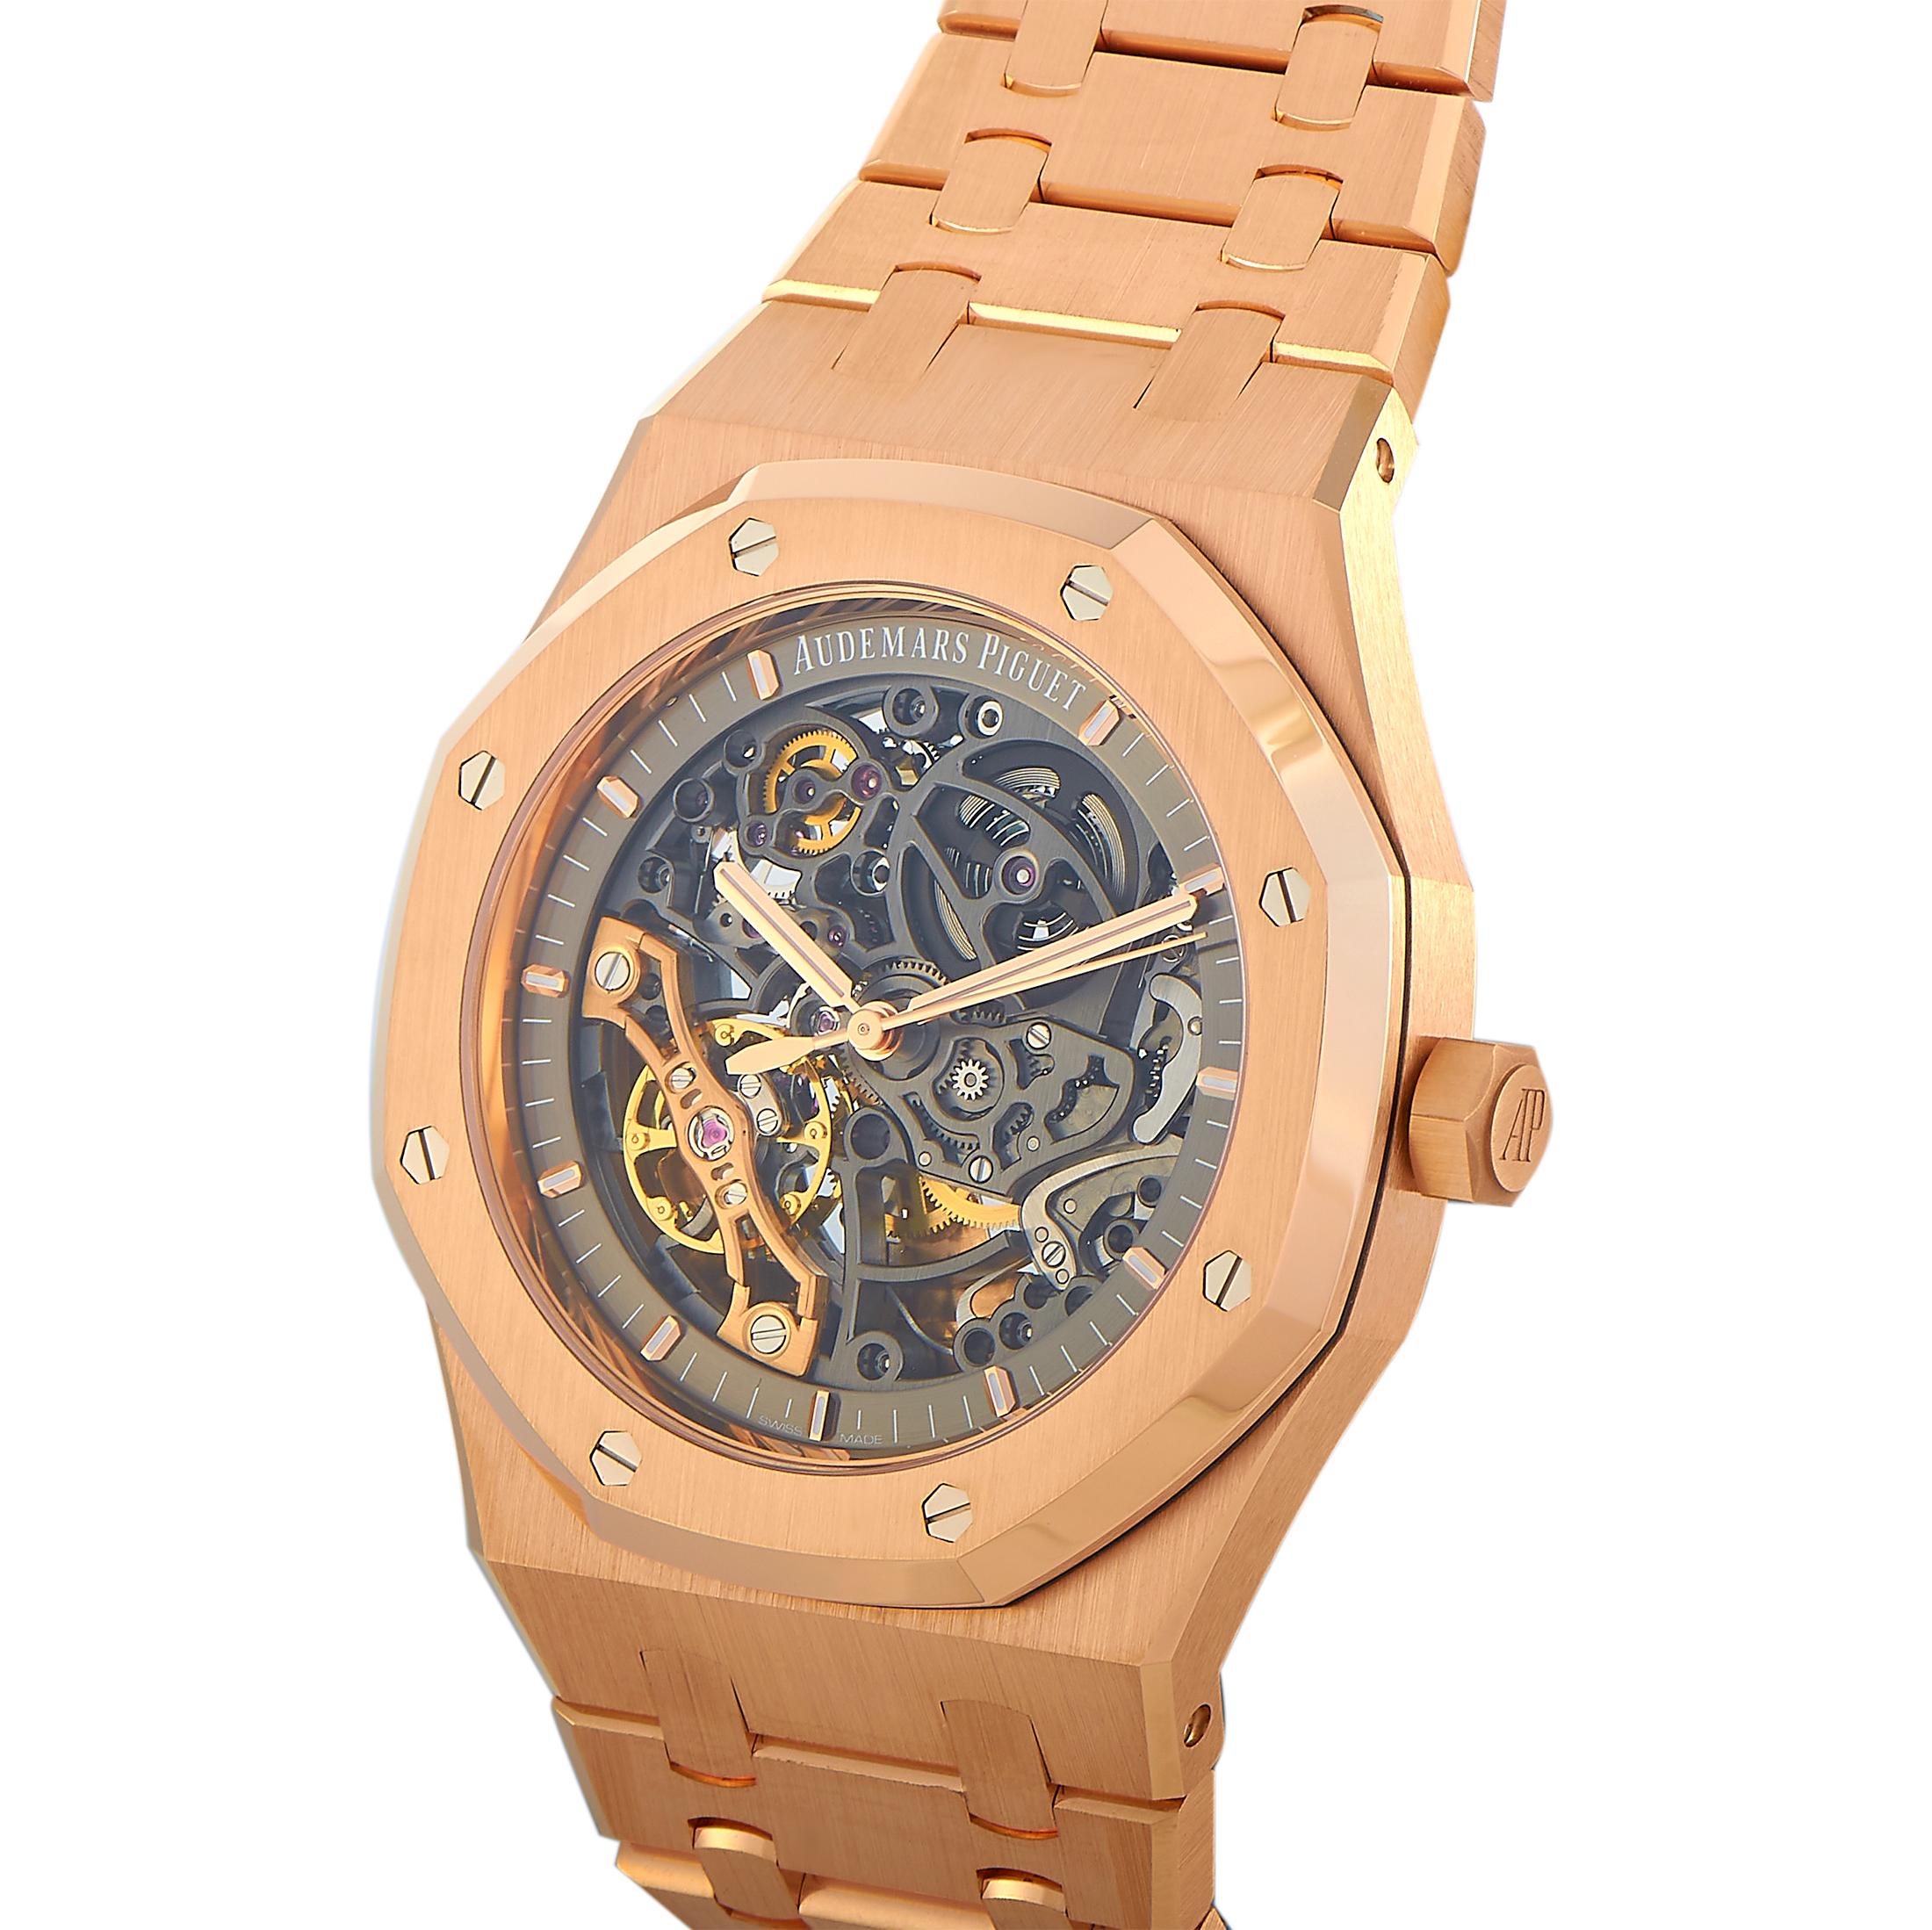 The Audemars Piguet Royal Oak Double Balance Wheel Openworked, reference number 15407OR.OO.1220OR.01, is a member of the iconic “Royal Oak” collection.

The watch is presented with a 41 mm 18K rose gold case that boasts transparent sapphire crystal